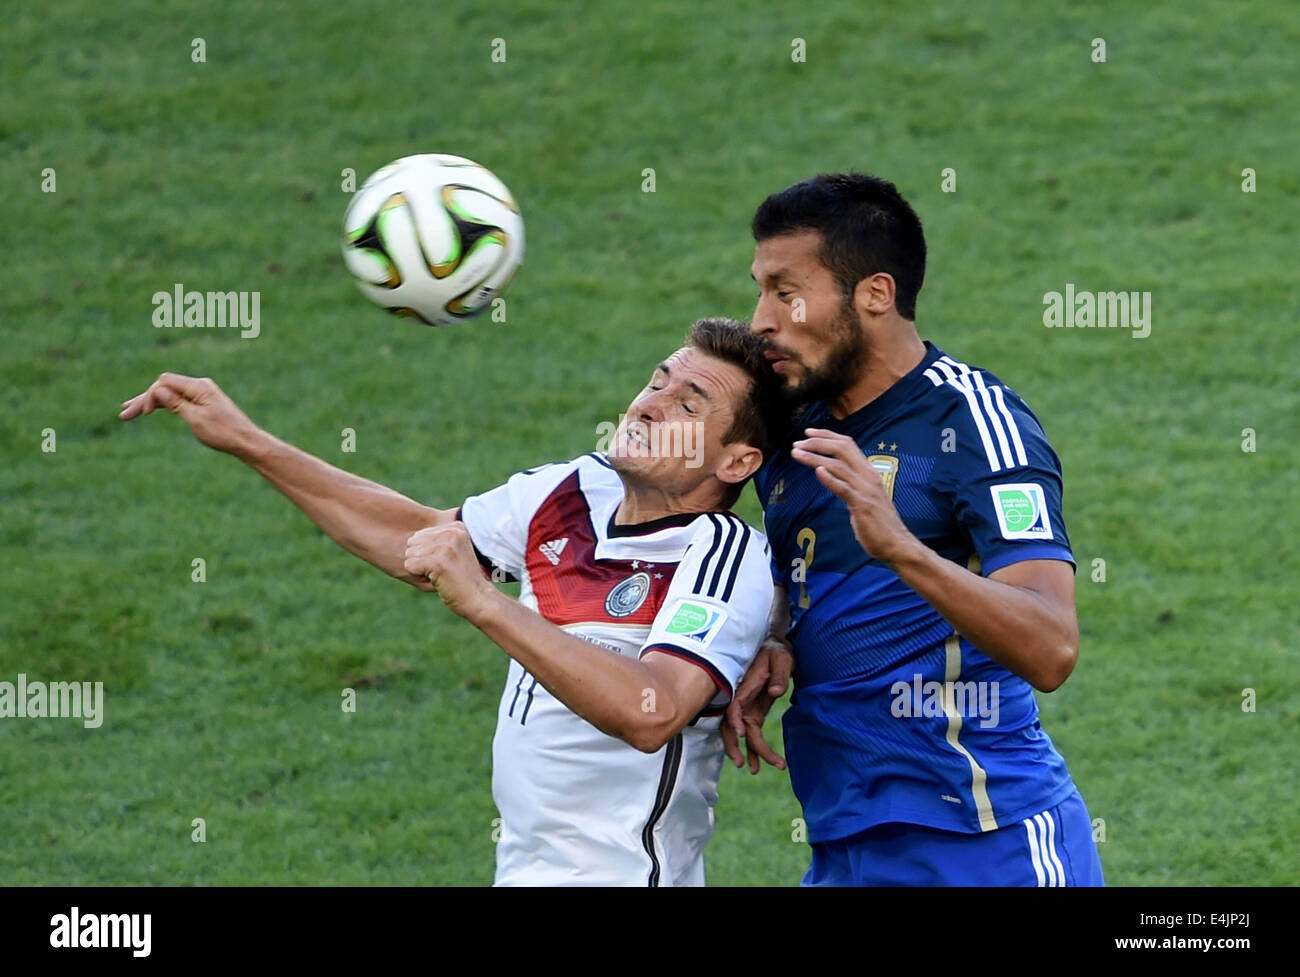 Rio De Janeiro, Brazil. 13th July, 2014. Germany's Miroslav Klose competes for a header with Argentina's Ezequiel Garay during the final match between Germany and Argentina of 2014 FIFA World Cup at the Estadio do Maracana Stadium in Rio de Janeiro, Brazil, on July 13, 2014. Credit:  Li Ga/Xinhua/Alamy Live News Stock Photo